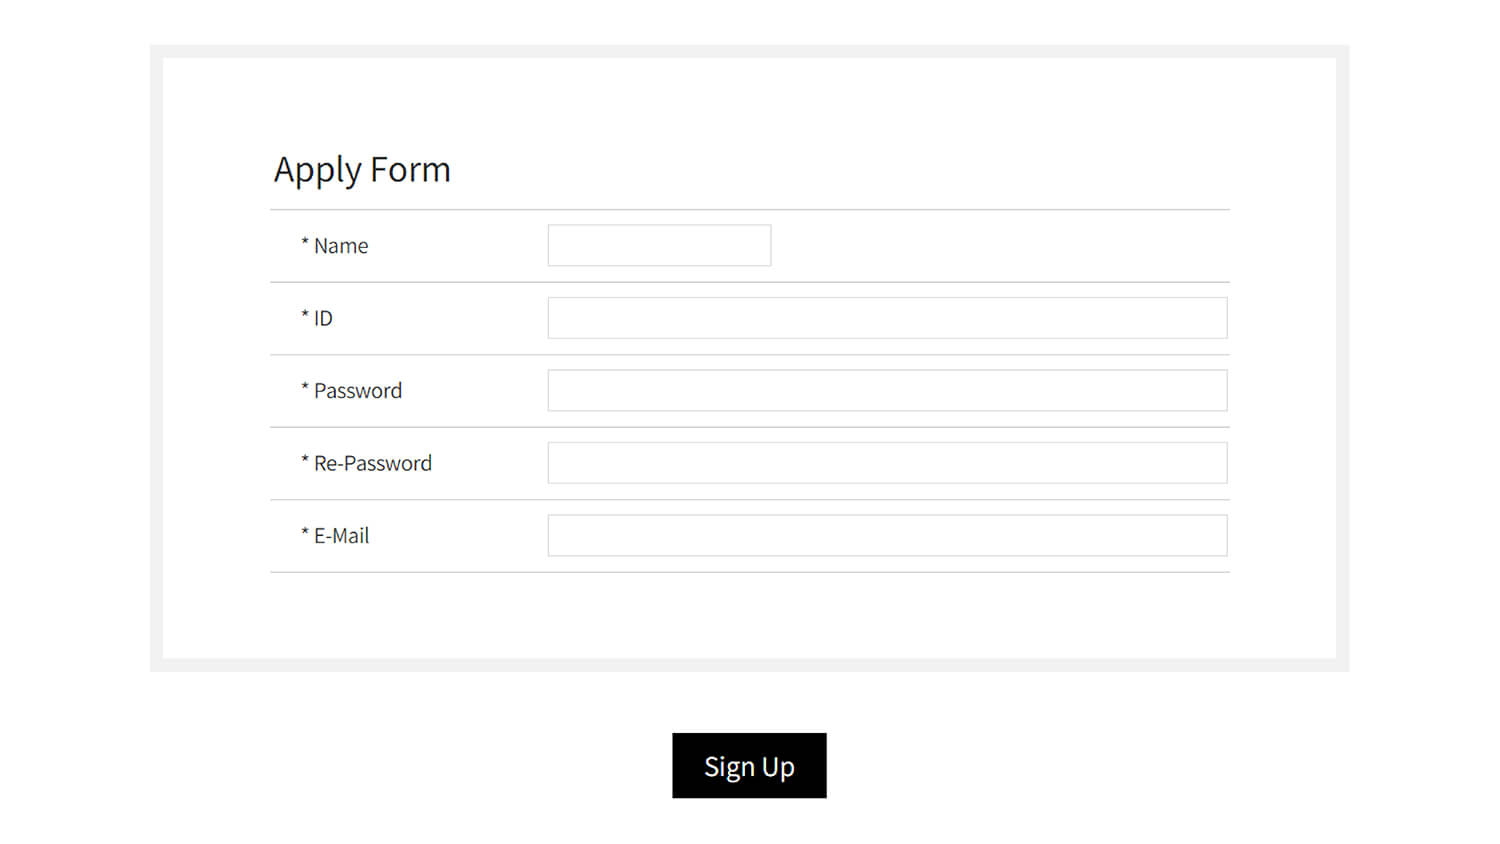 Step 2: To register enter your data and press SIGN UP.